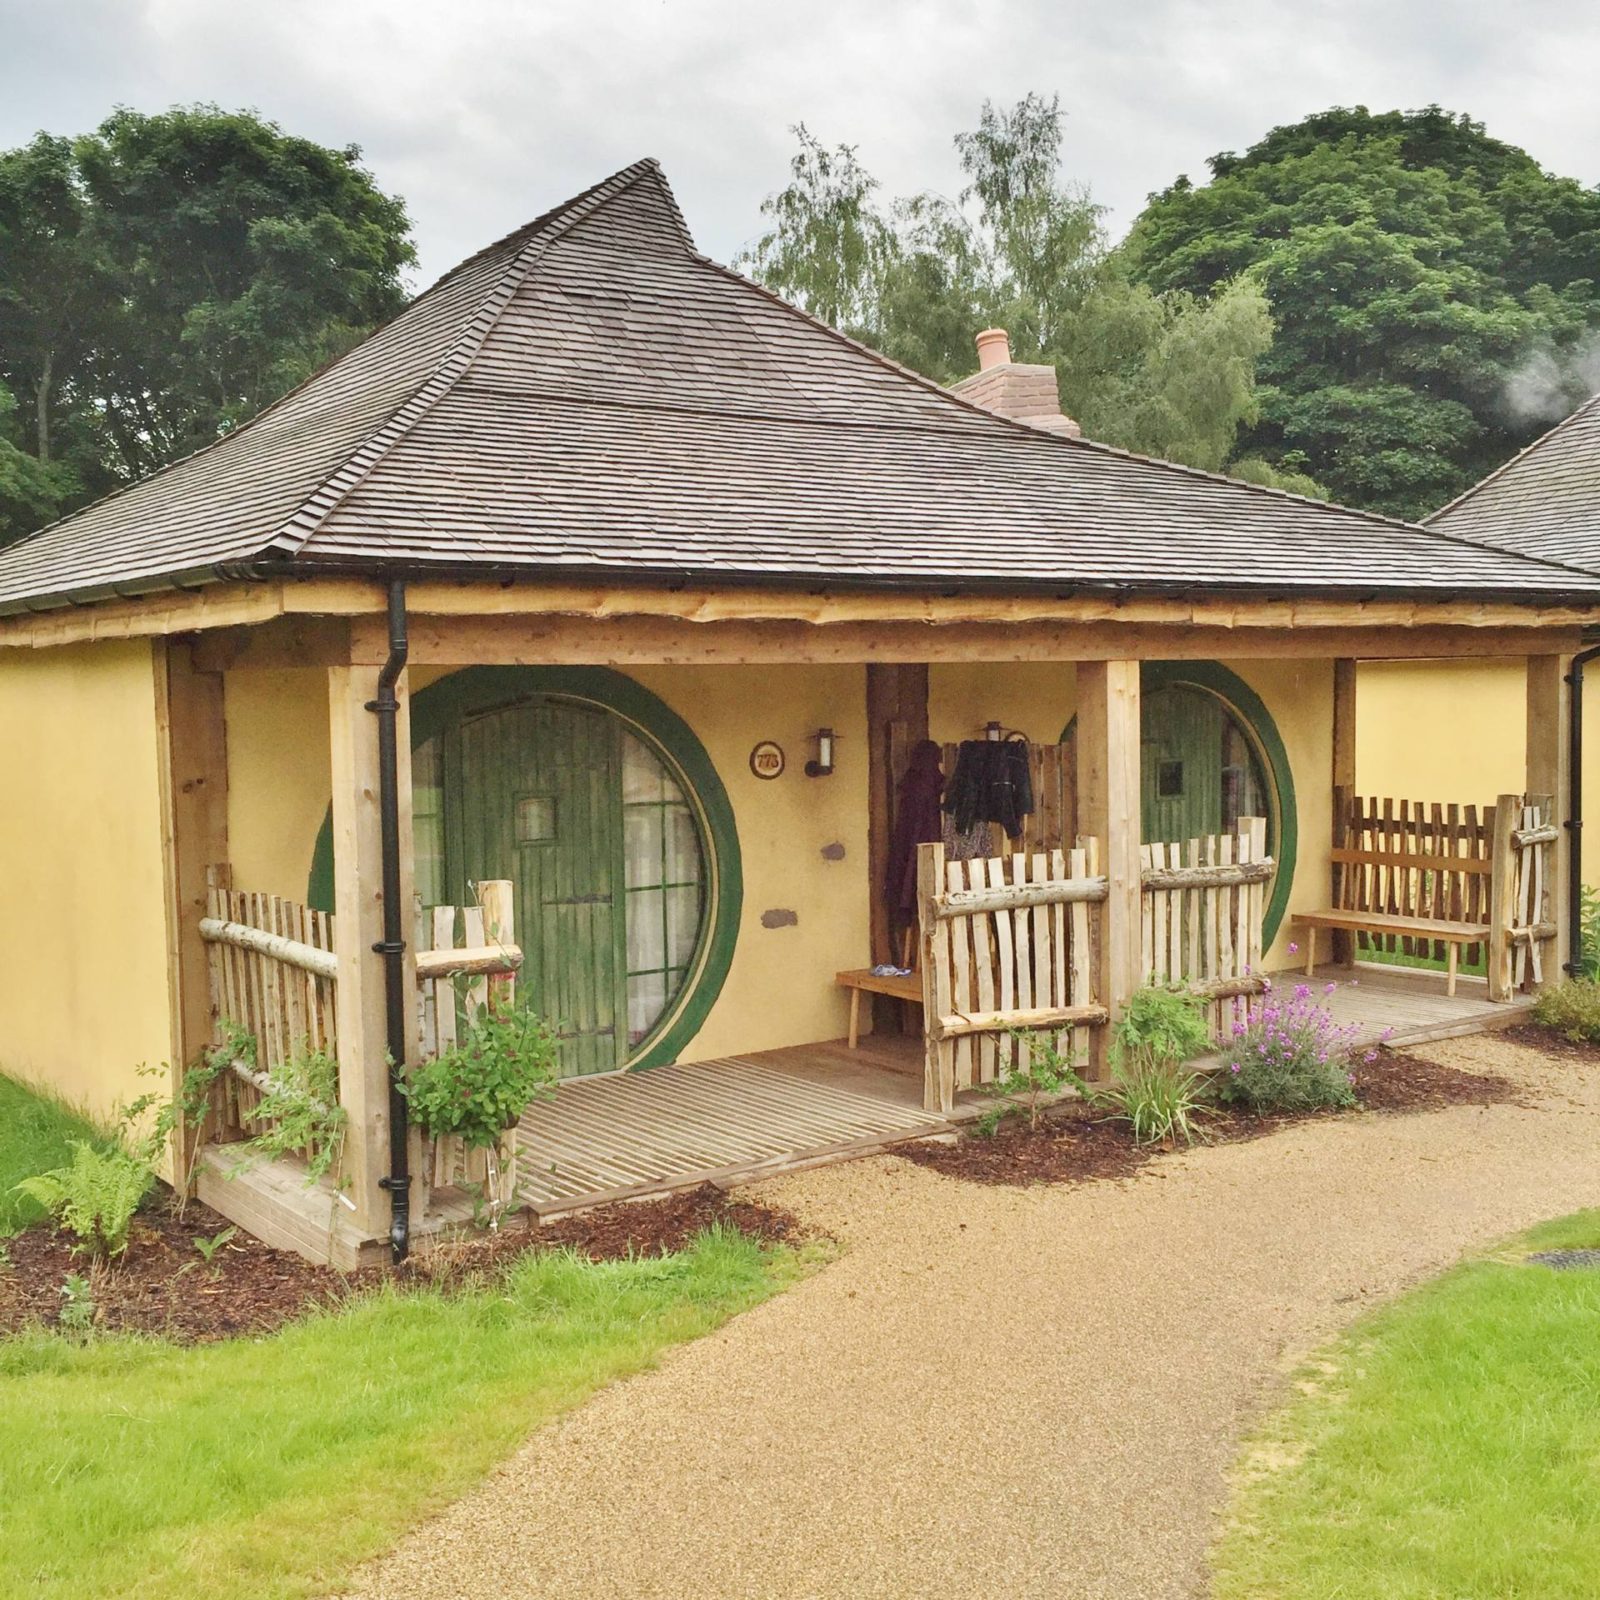 Emma Victoria Stokes Enchanted Lodges Alton Towers The Shire House